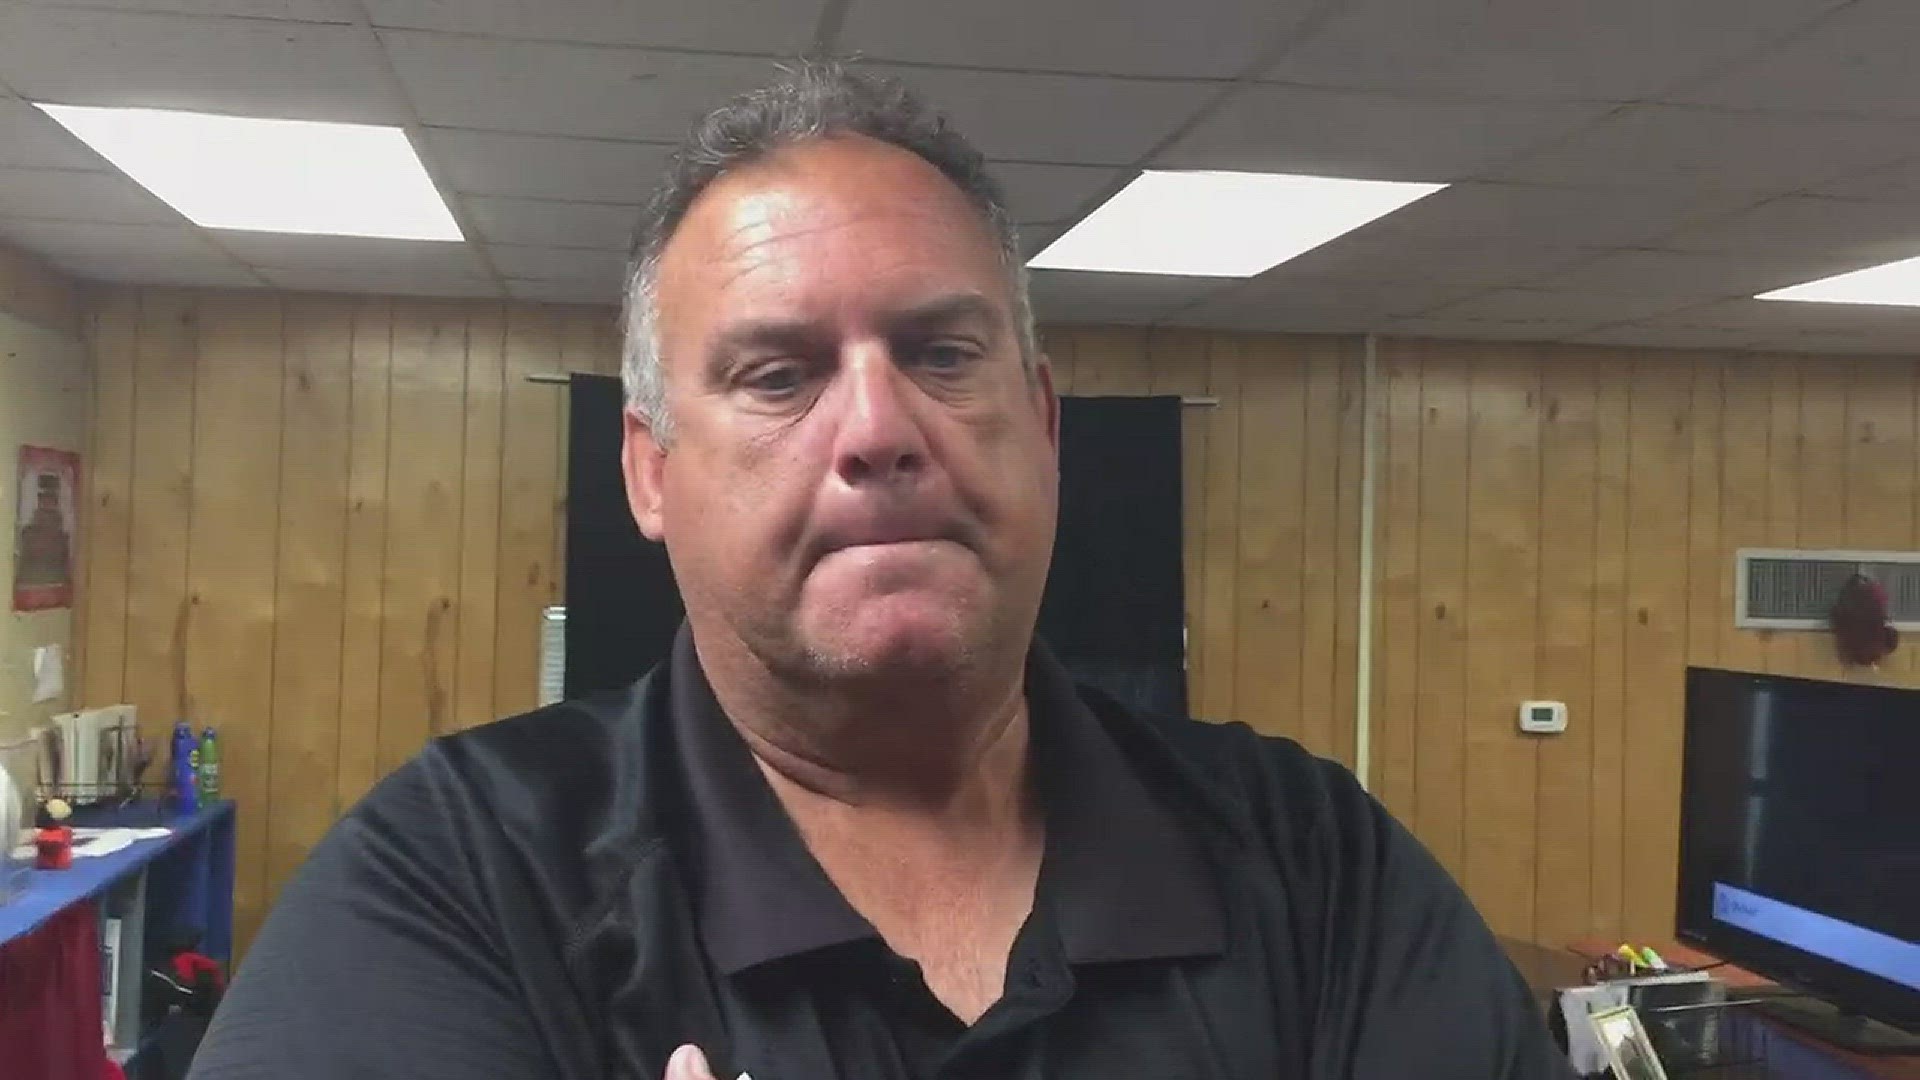 Southside coach Ricky Lock on his team overcoming injuries to key players